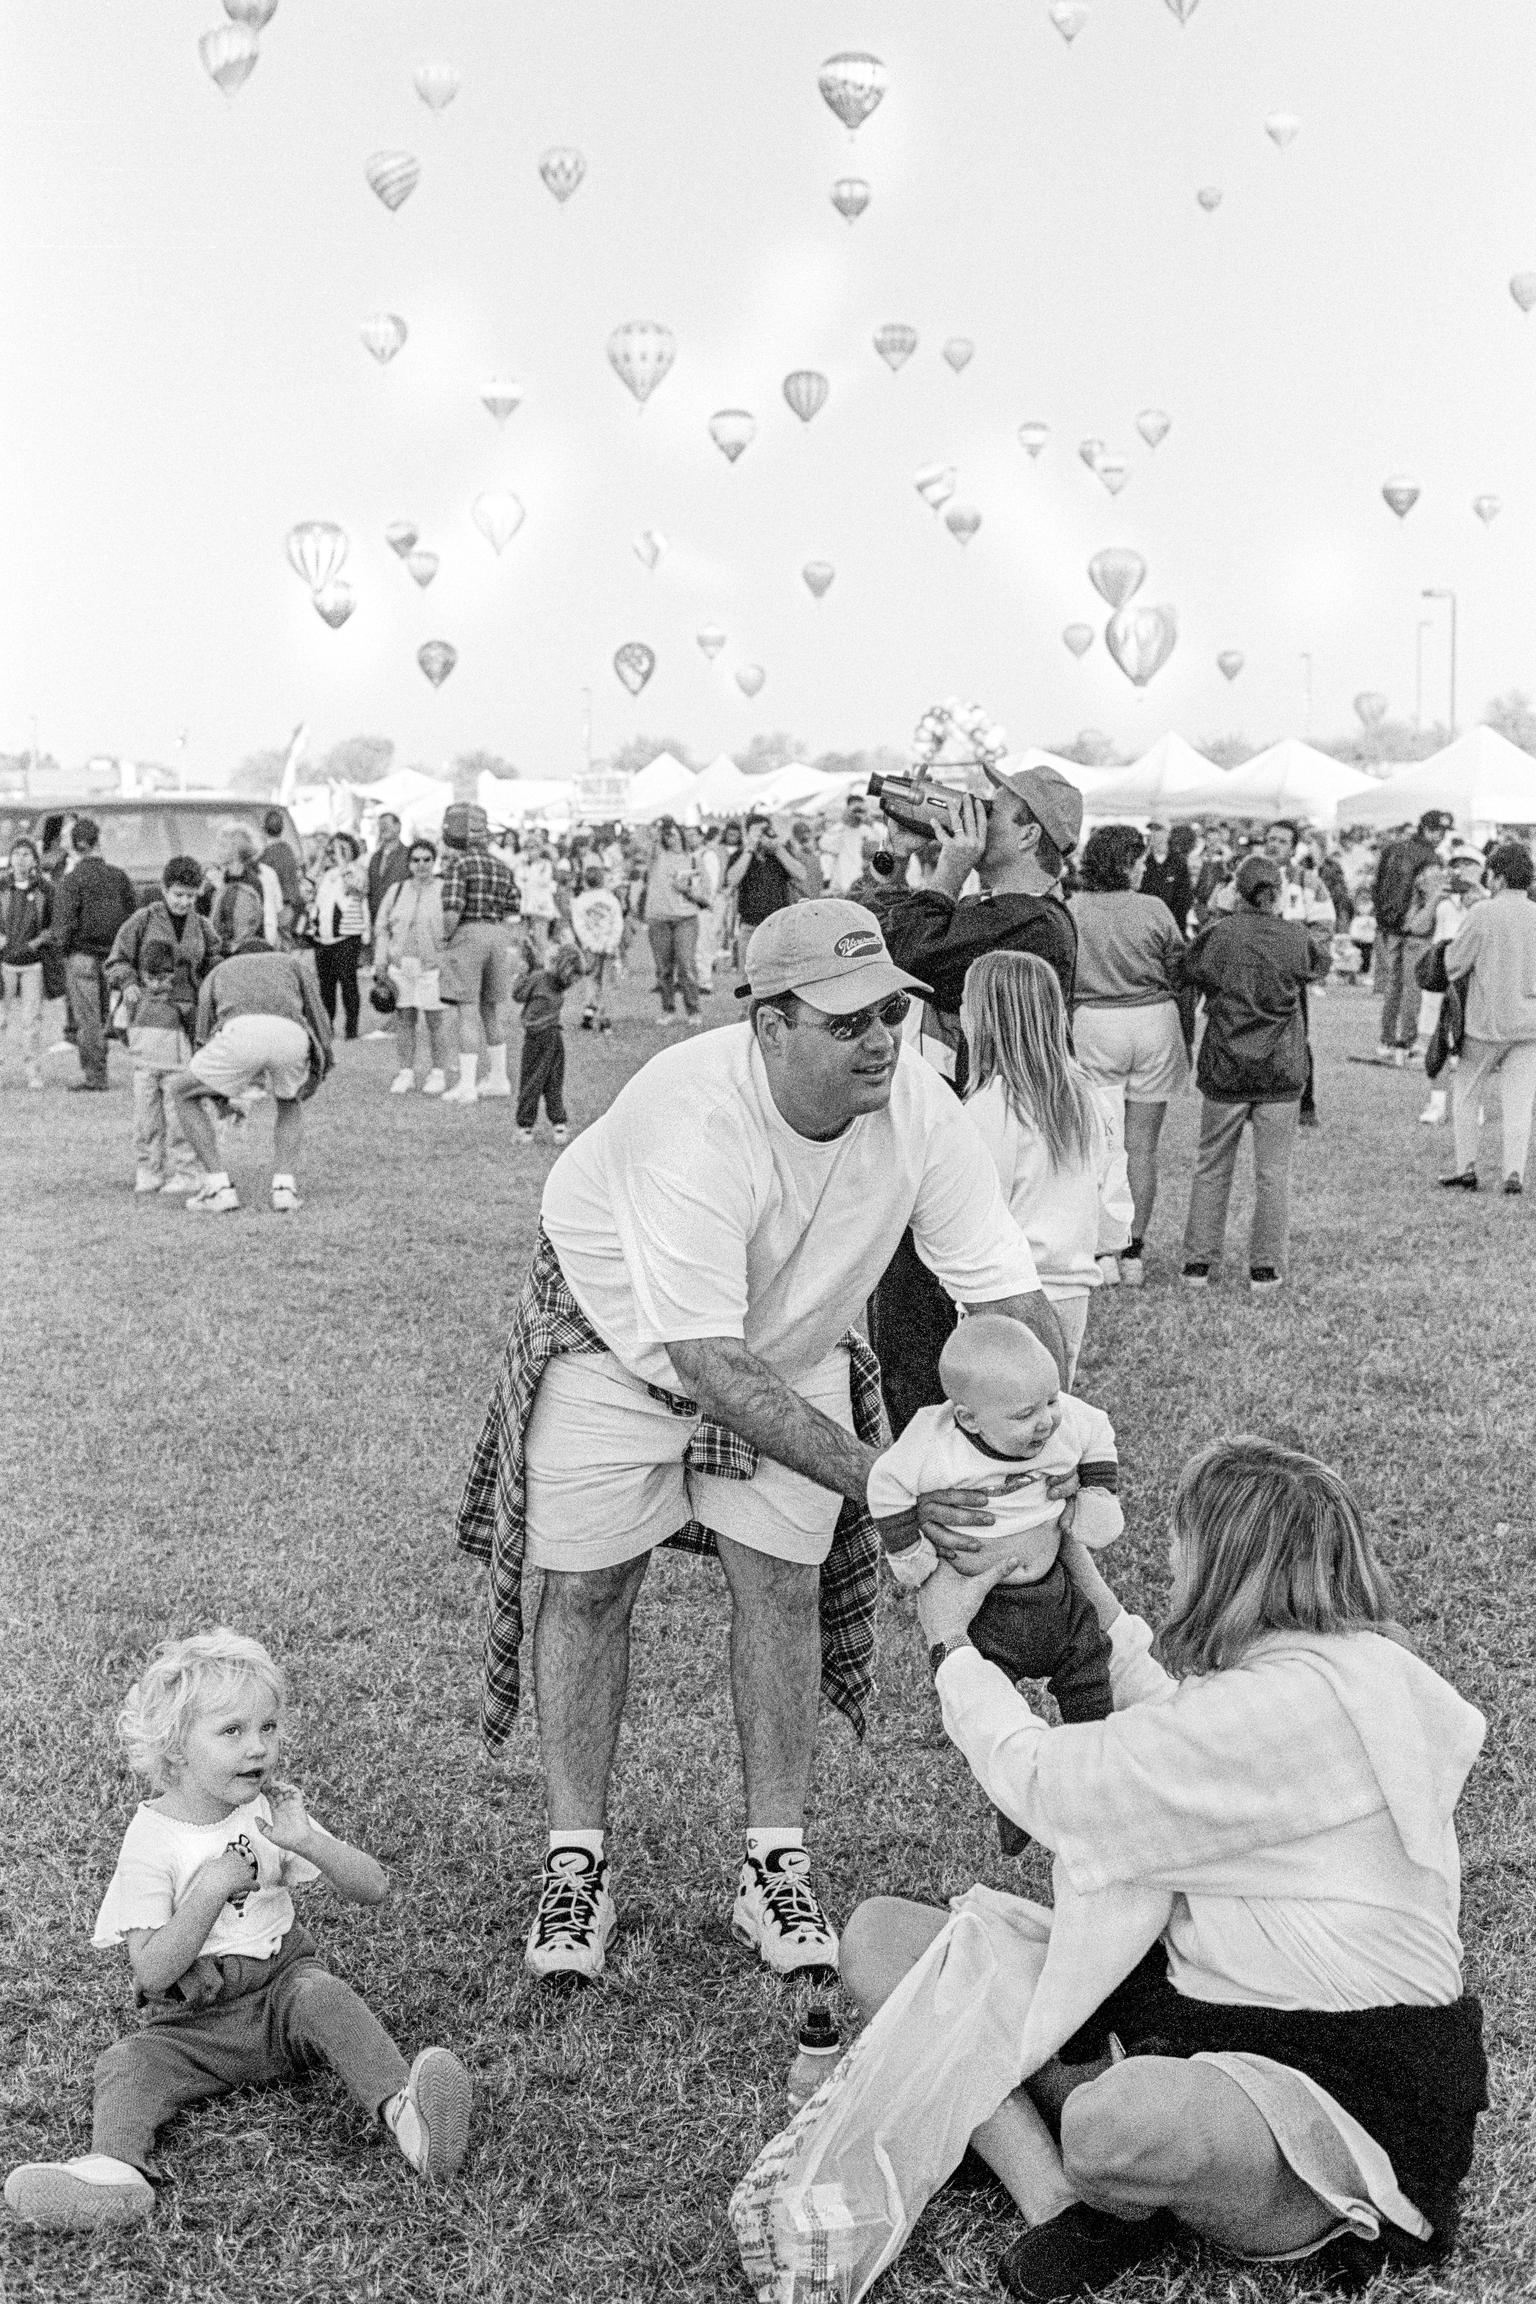 Phoenix Balloon Rally. Family group enjoying a day out in the sun. Hundreds of Balloons fly in the background. Phoenix, Arizona USA